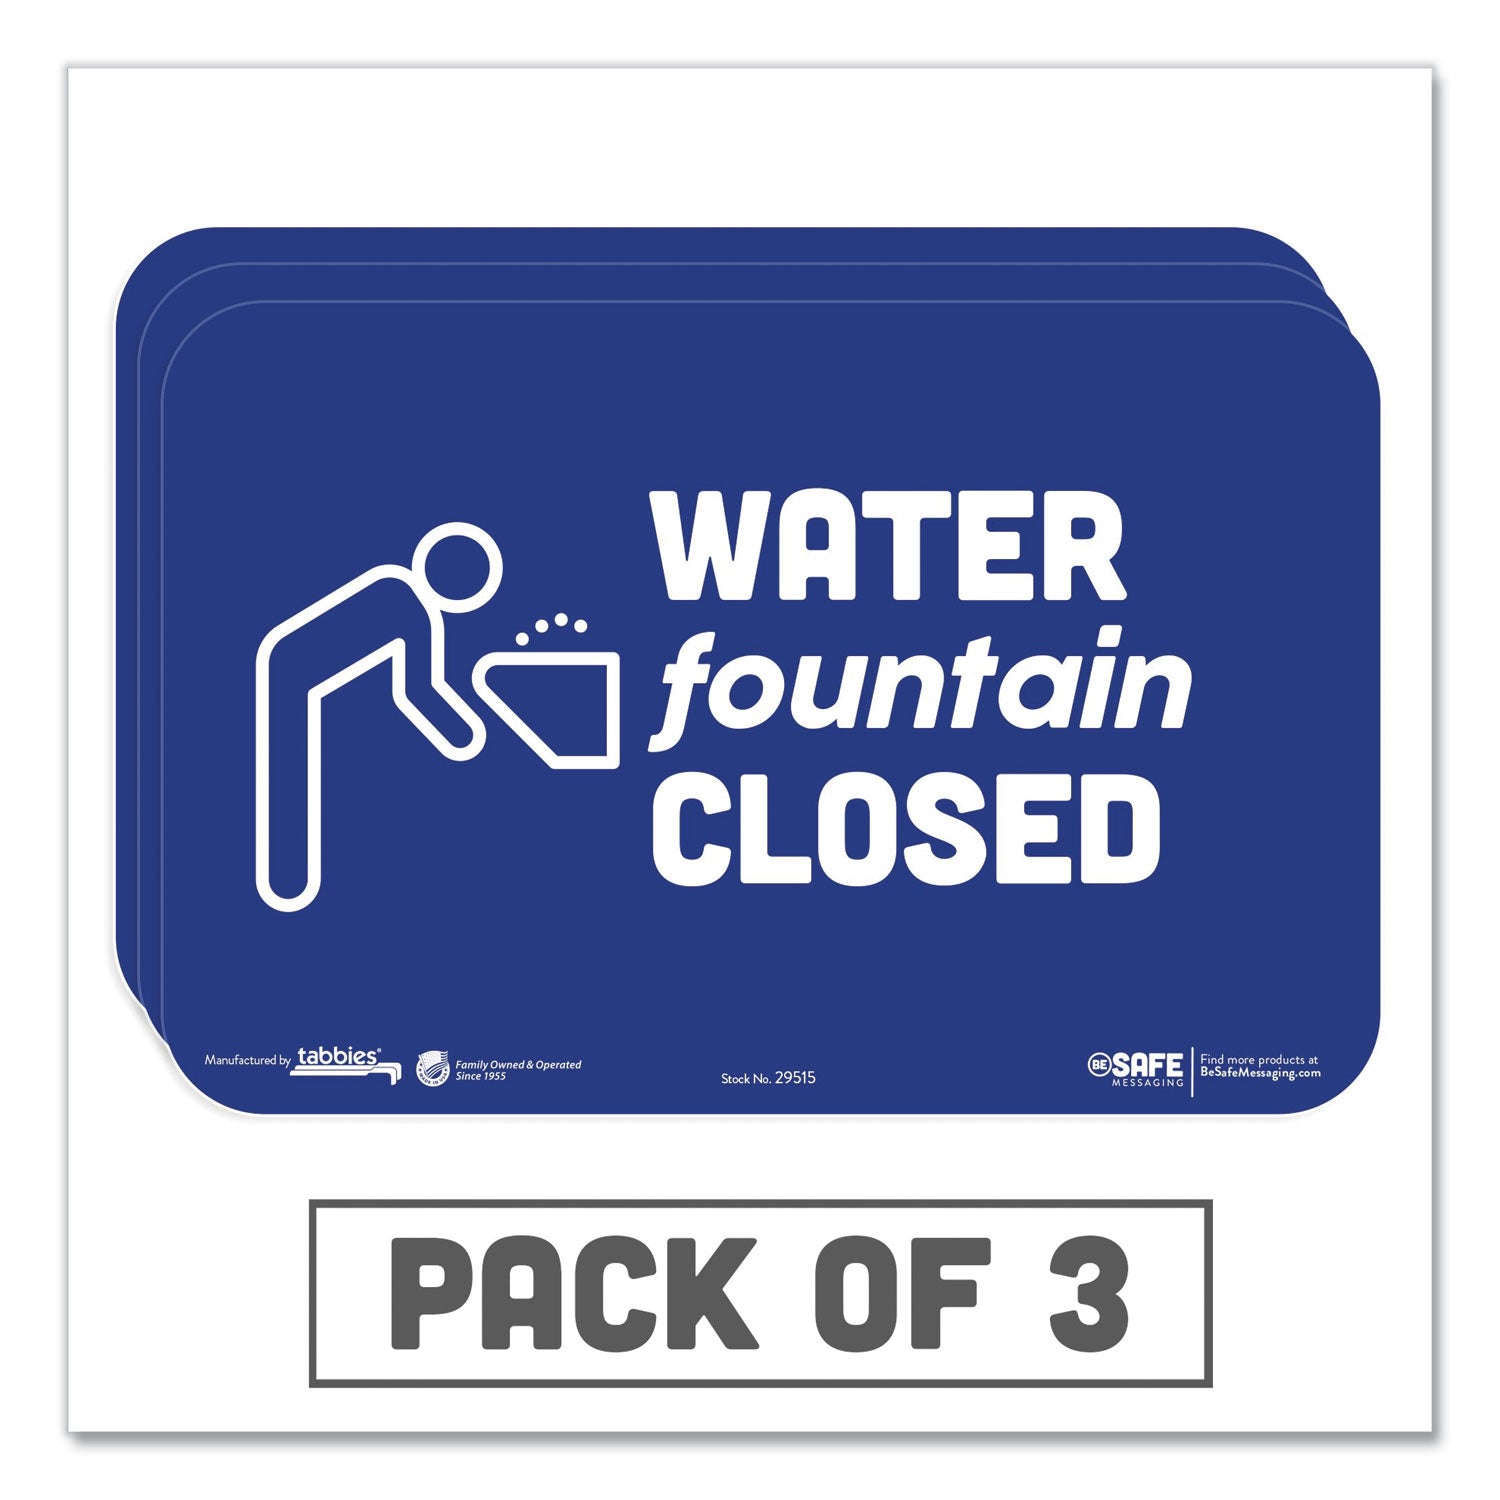 besafe-messaging-education-wall-signs-9-x-6-water-fountain-closed-3-pack_tab29515 - 1